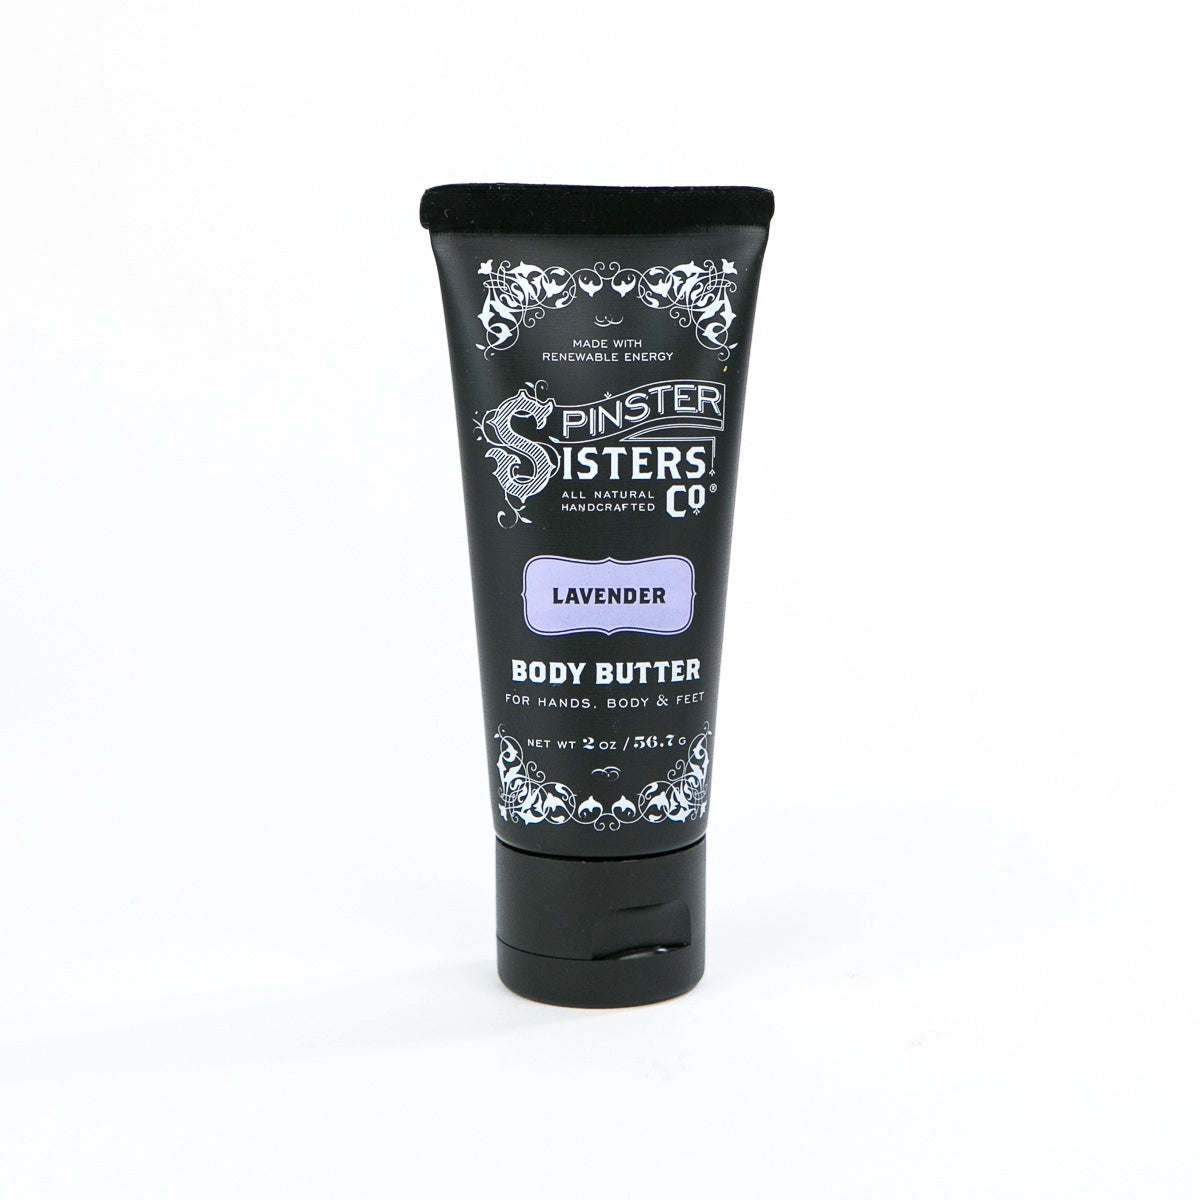 Spinster Sister Body Butter Travel Size at 6Whiskey six whisky 2 oz bottled lotion made in USA all natural lavender scent 